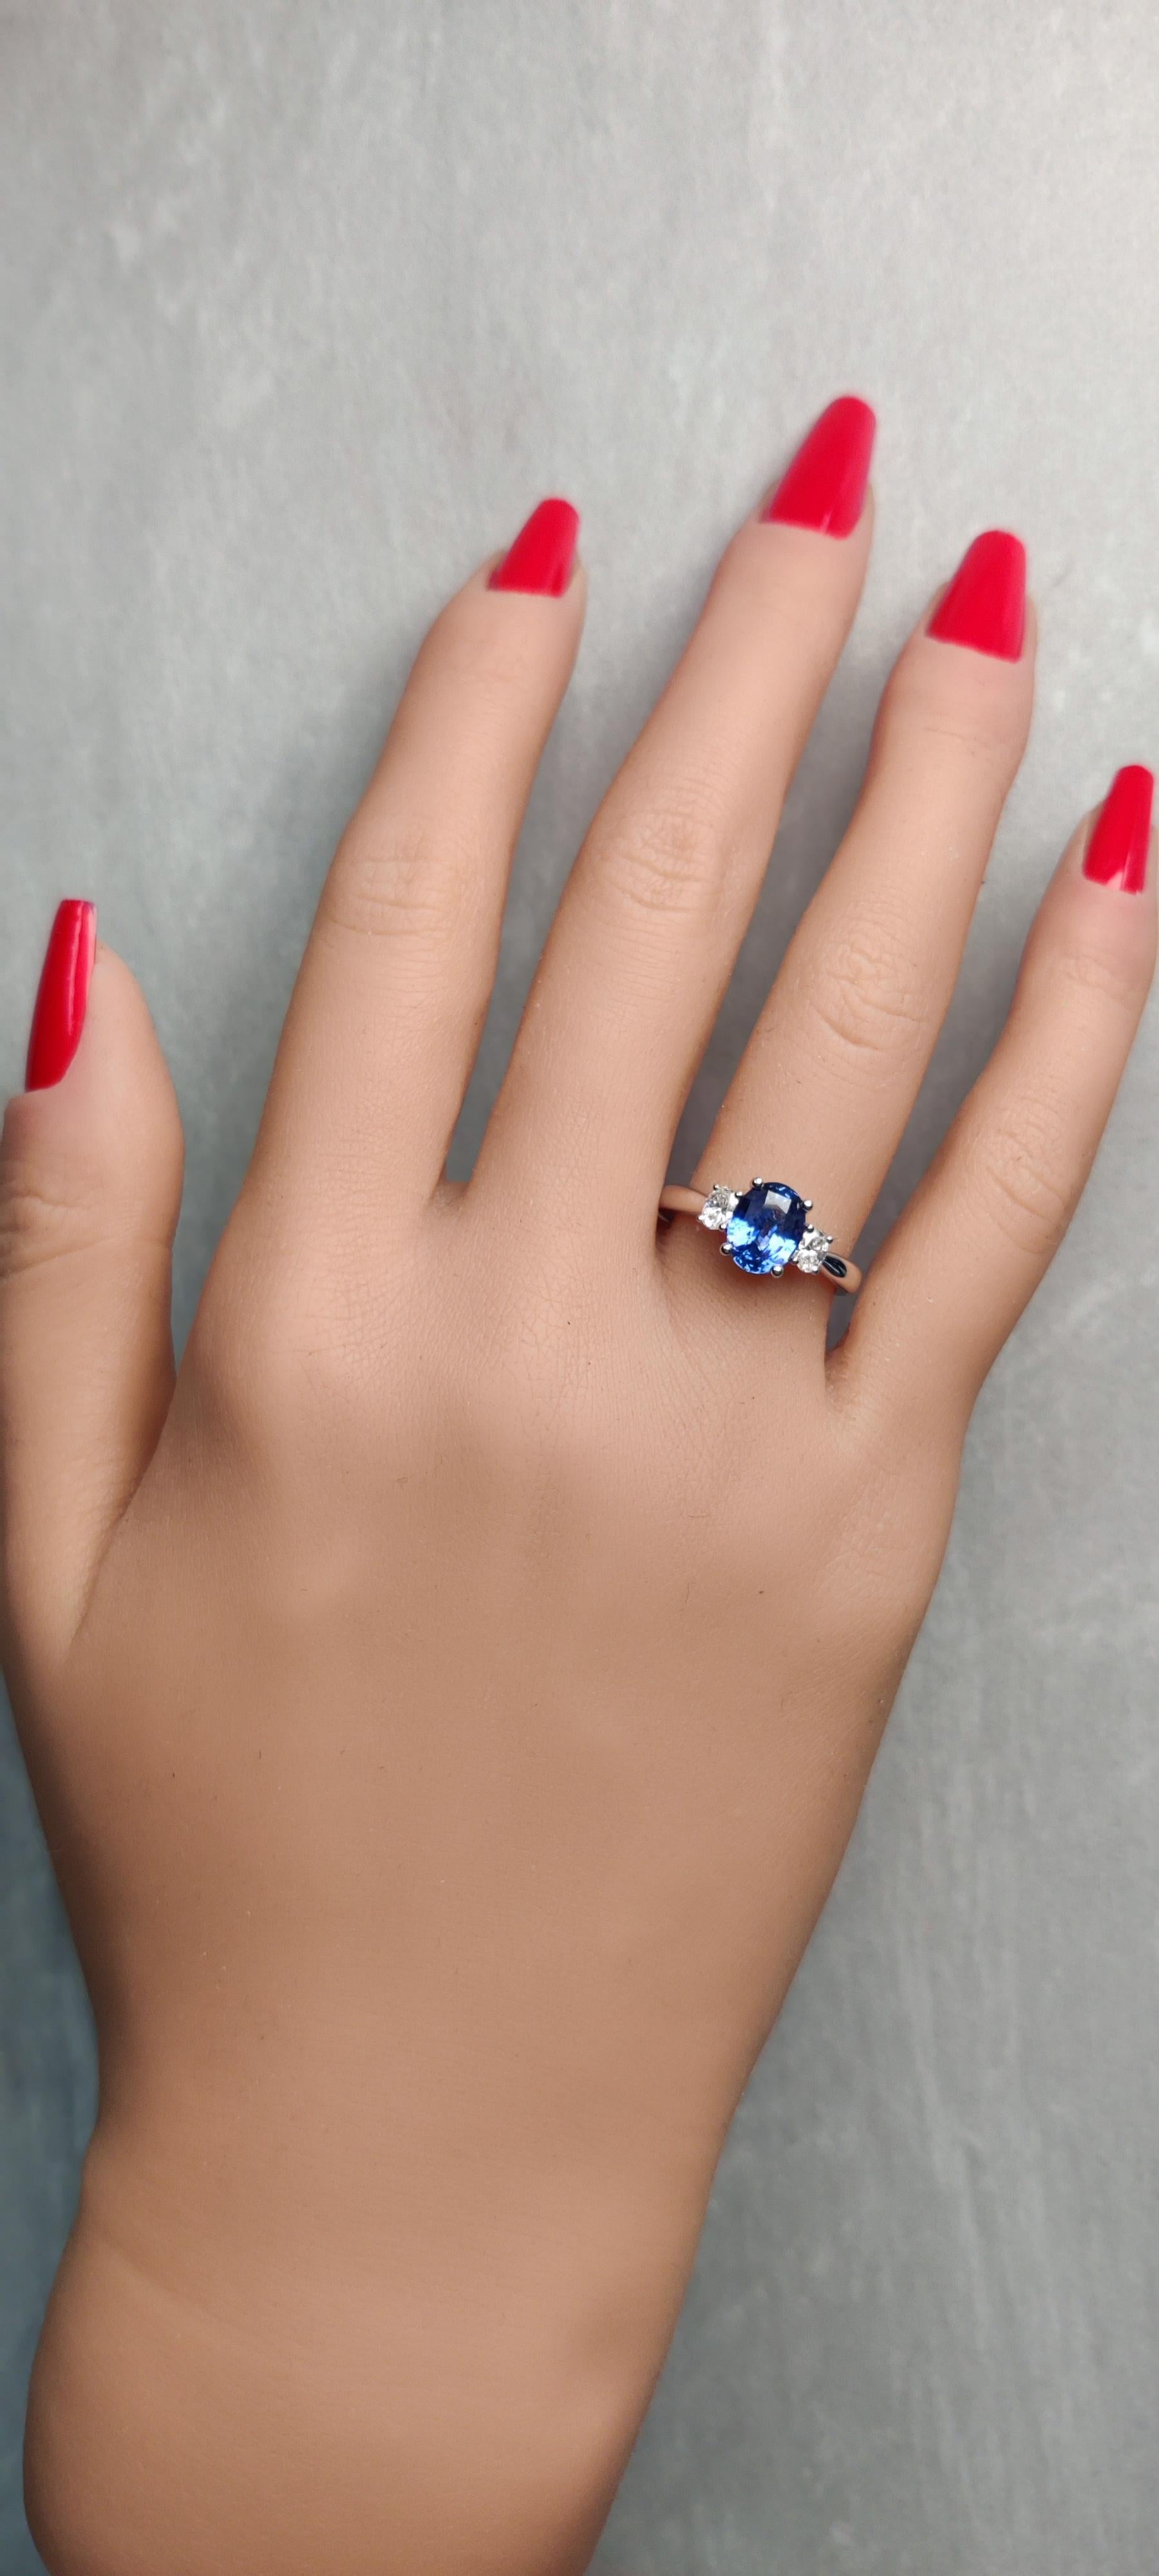 RareGemWorld's classic sapphire ring. Mounted in a beautiful 14K White Gold setting with a natural oval cut blue sapphire. The sapphire is surrounded by two natural oval cut white diamonds. This ring is guaranteed to impress and enhance your